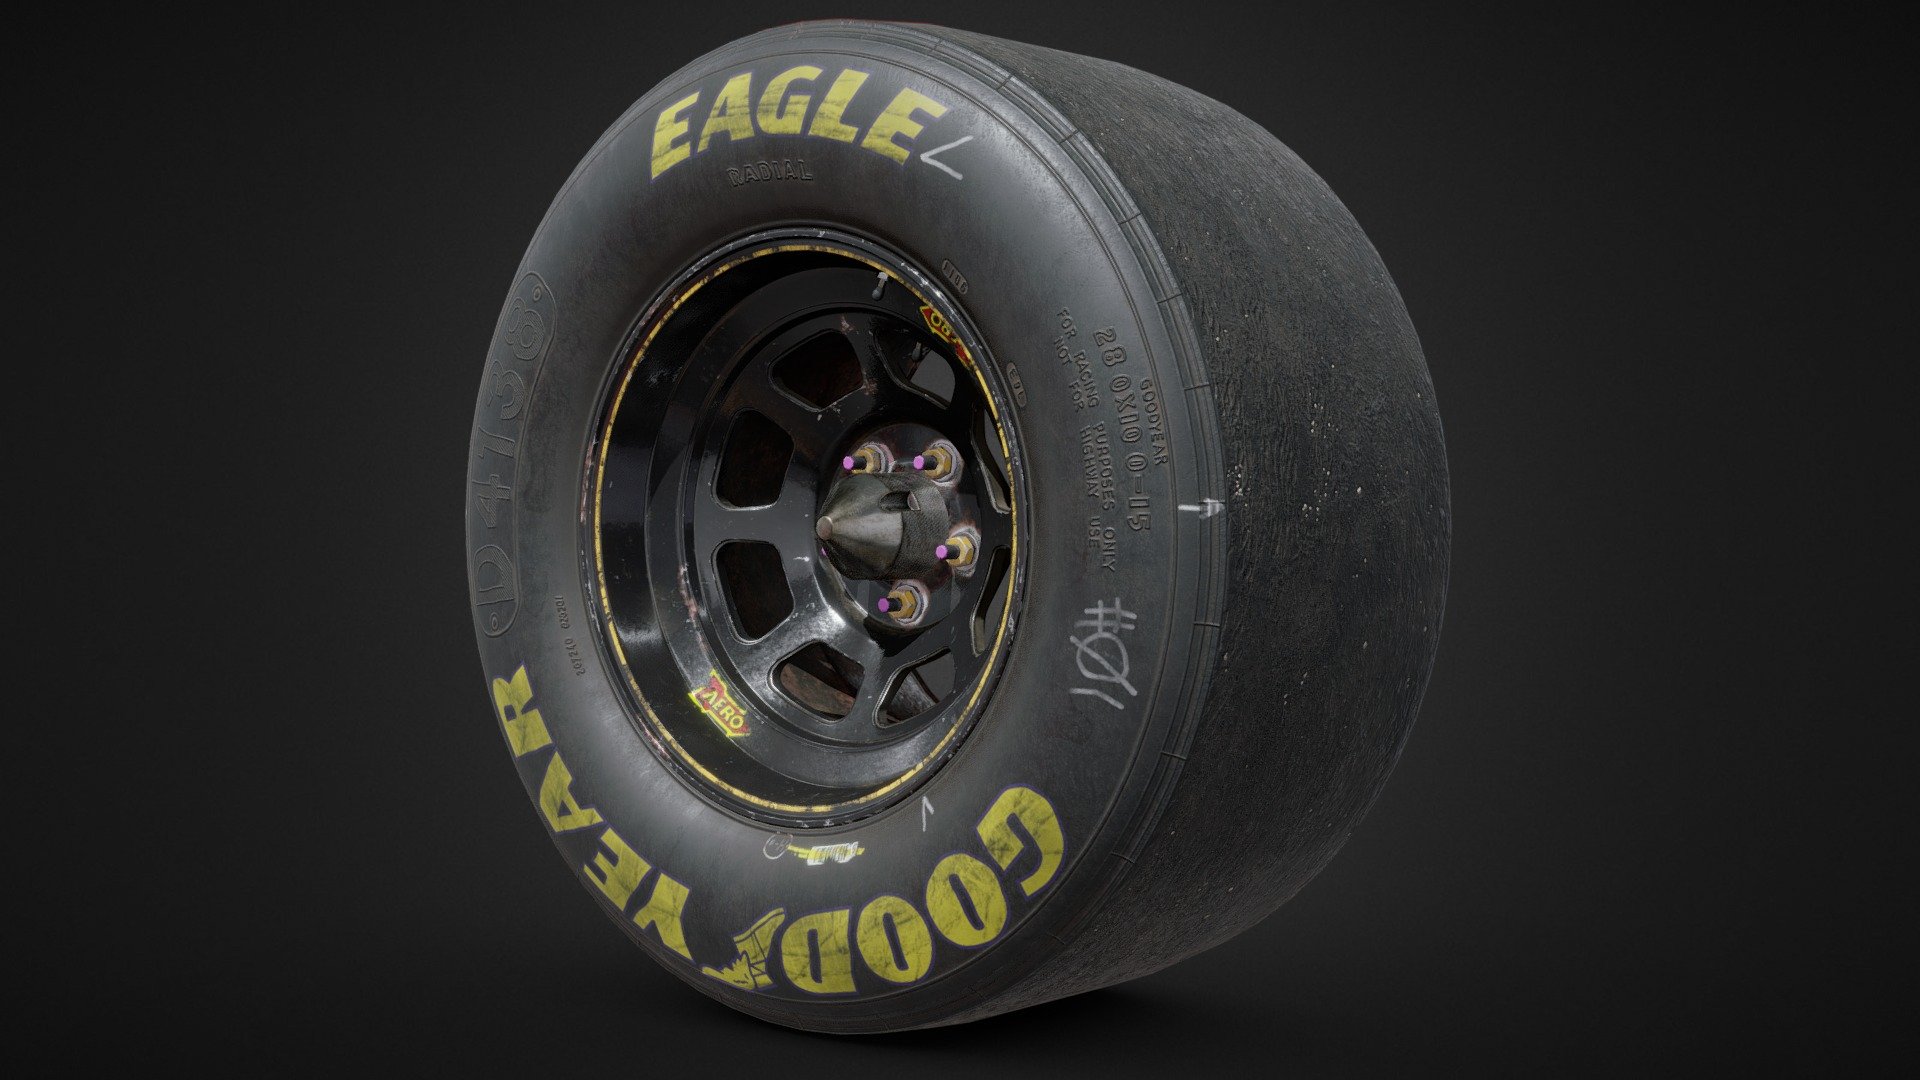 PBR Low Poly 3d model of NASCAR wheel from 00`s.

Polys - 5 157
Verts - 5 082

There are 2 meshes and 3 texture sets for tires and rim separately. Includes different sets for WORN and FINE tires
This model uses the metalness PBR workflow

Real-world scale 3d model